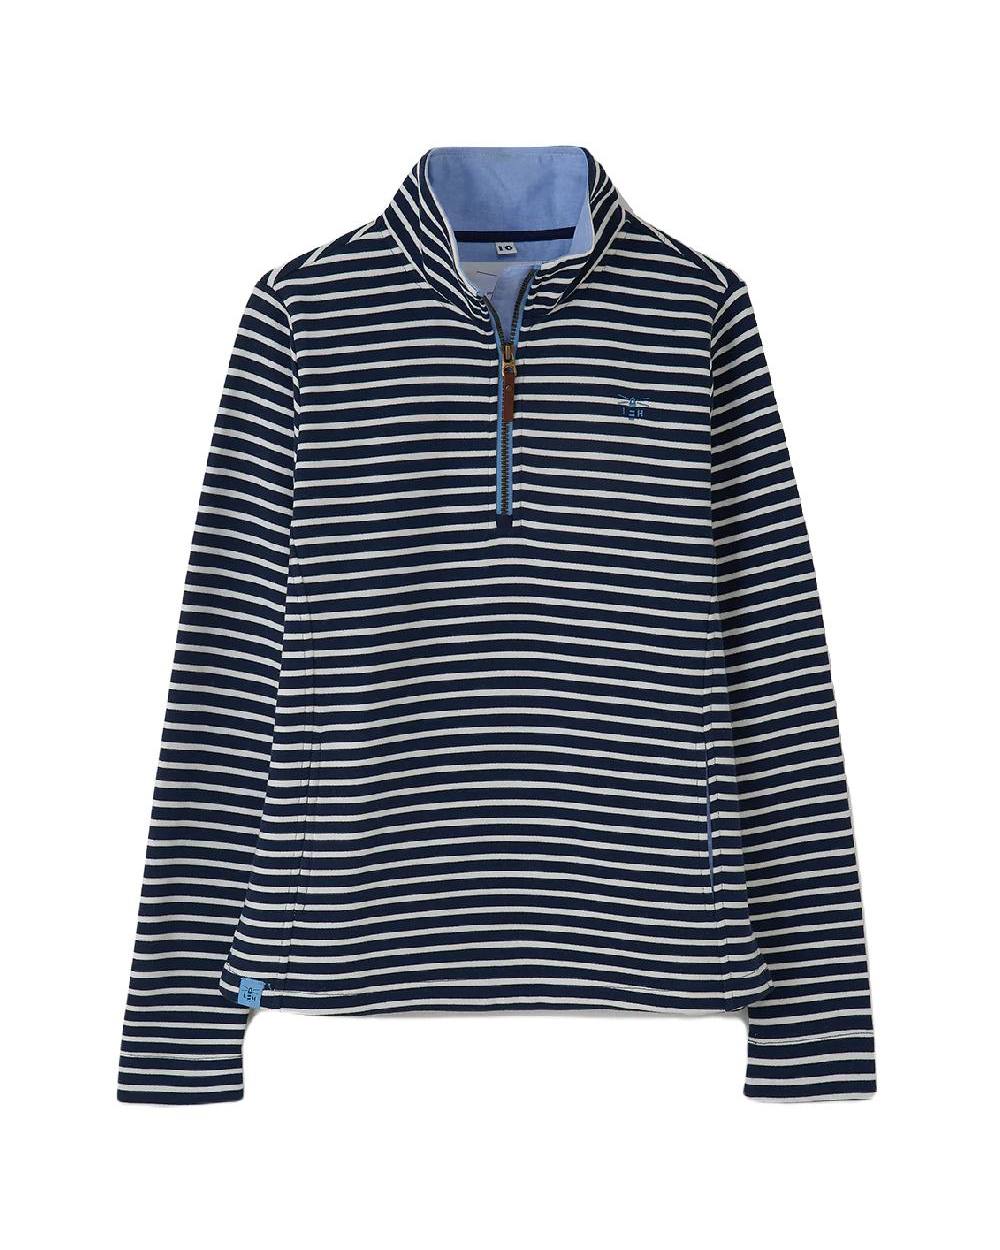 Lighthouse Shore Jersey Top in Midnight Stripe 